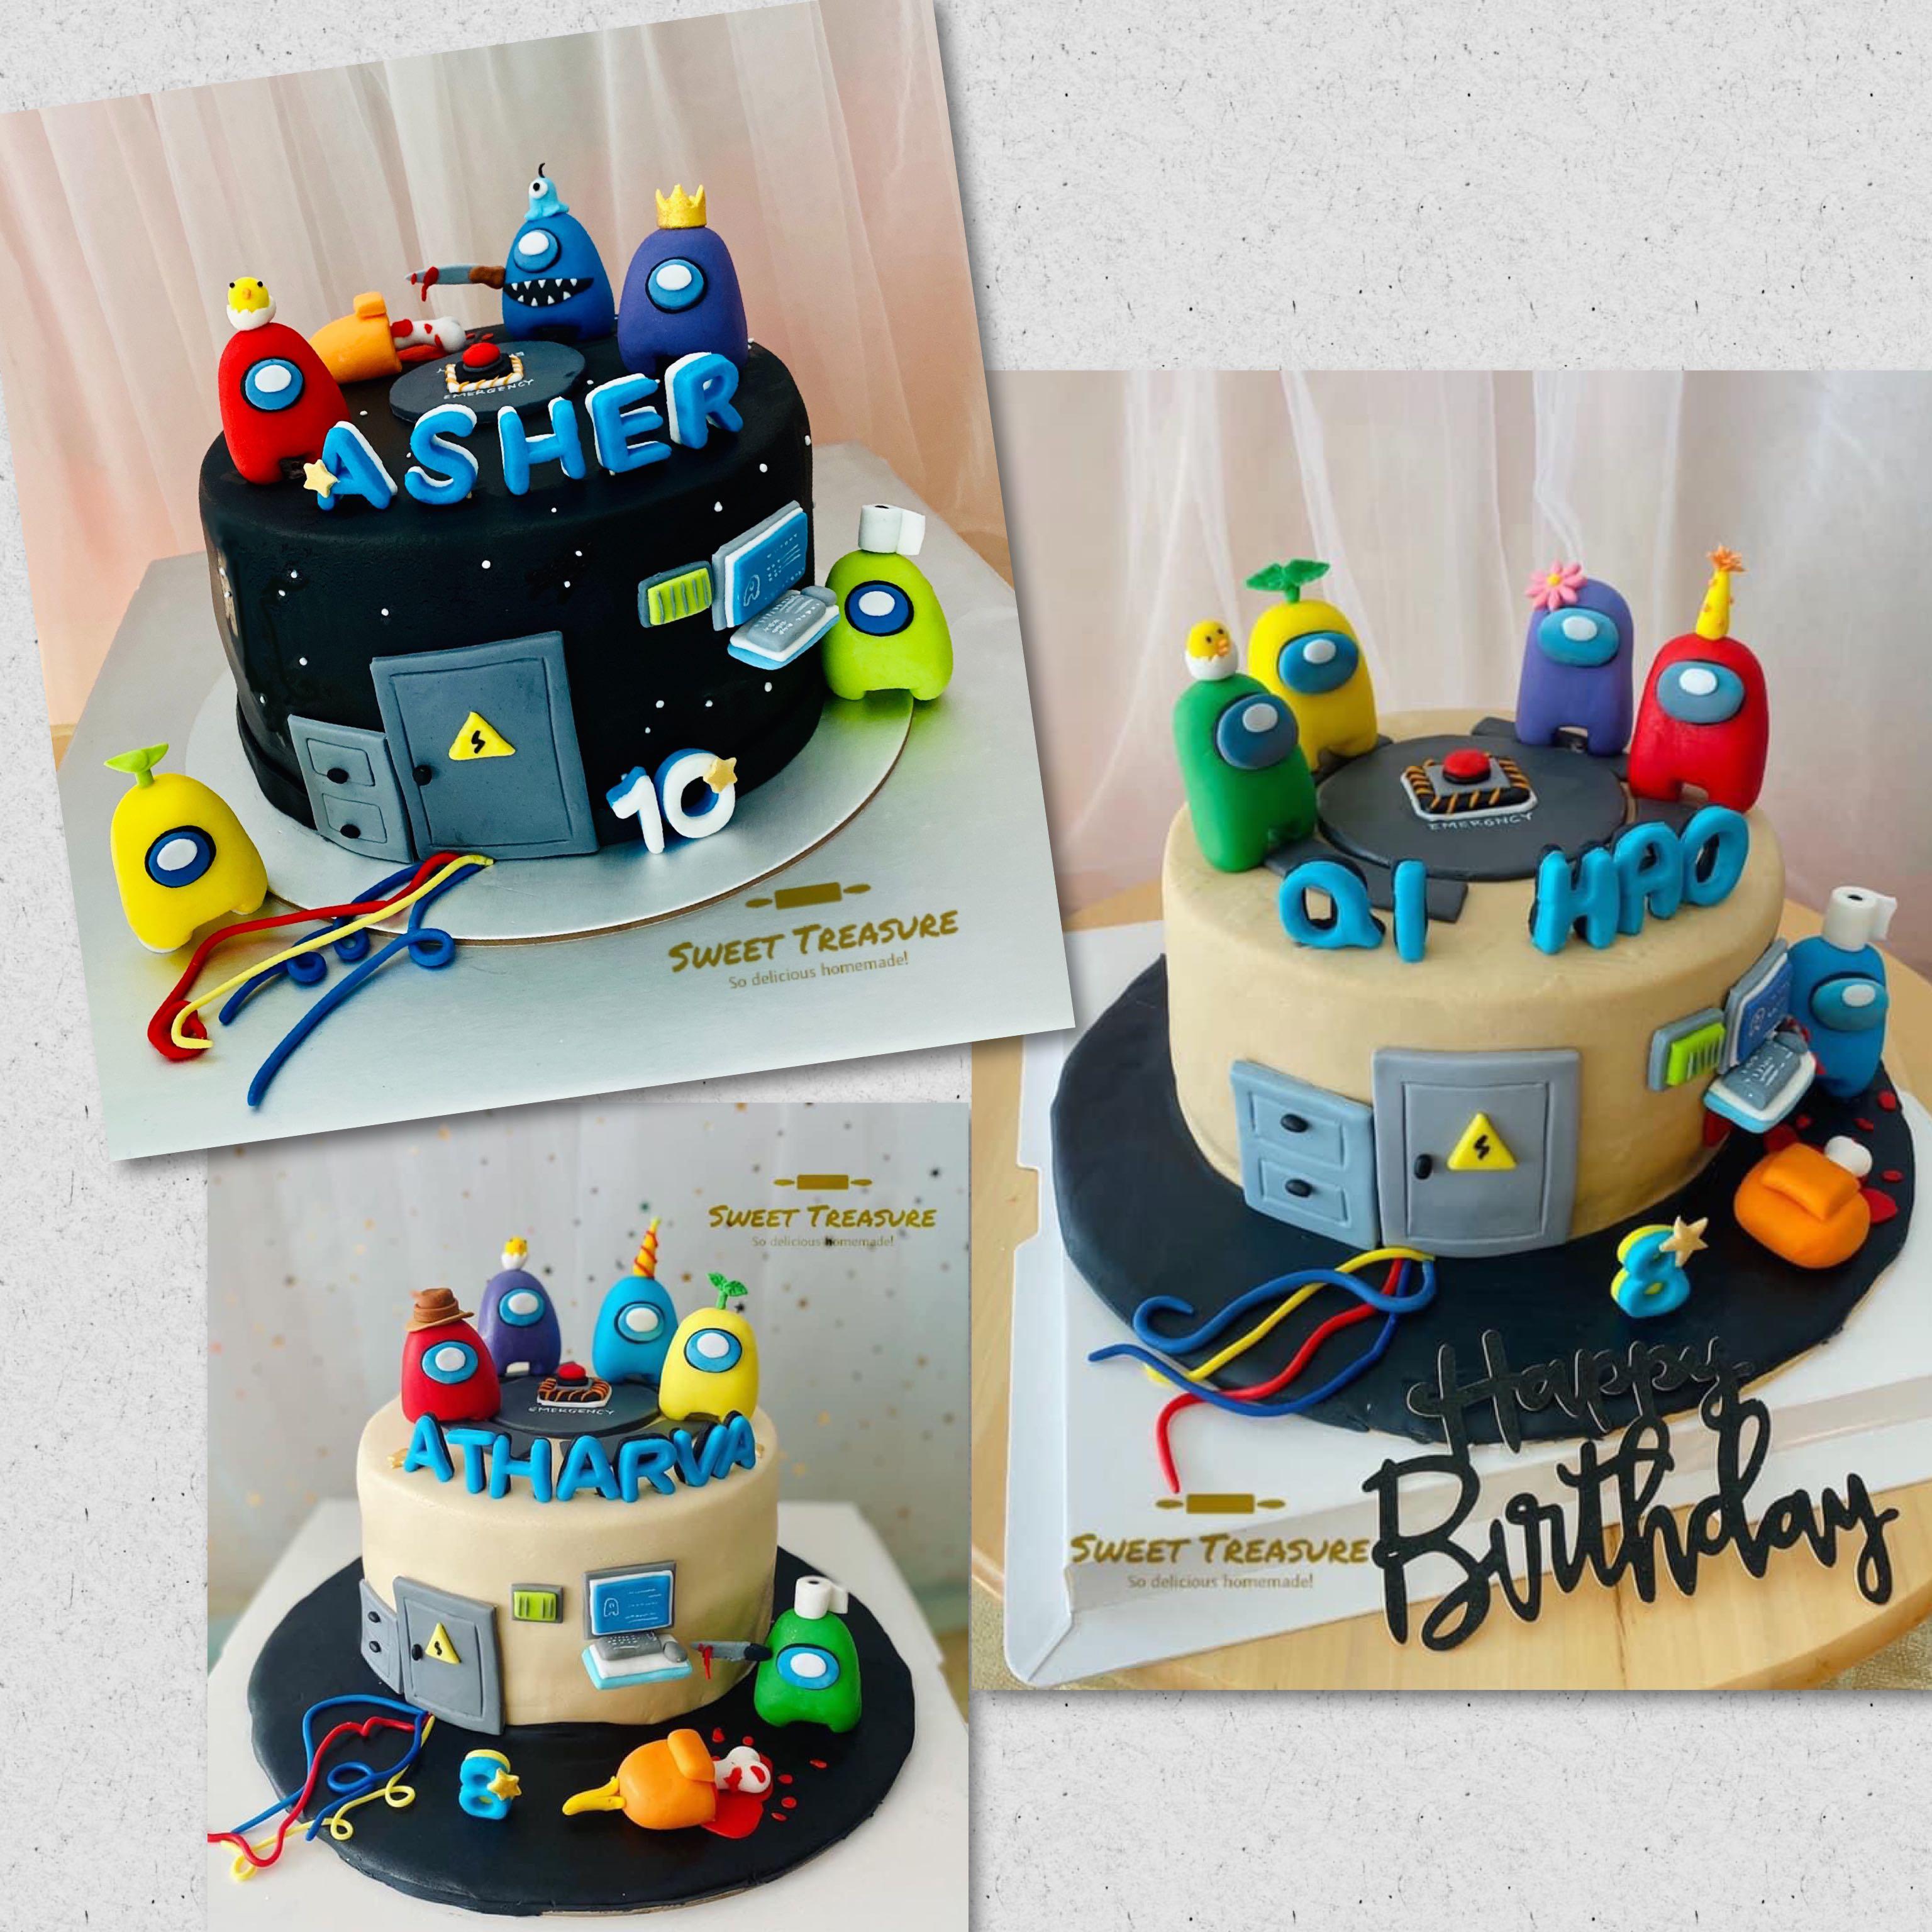 5inch Animal Crossing Game Cake, Food & Drinks, Homemade Bakes on Carousell